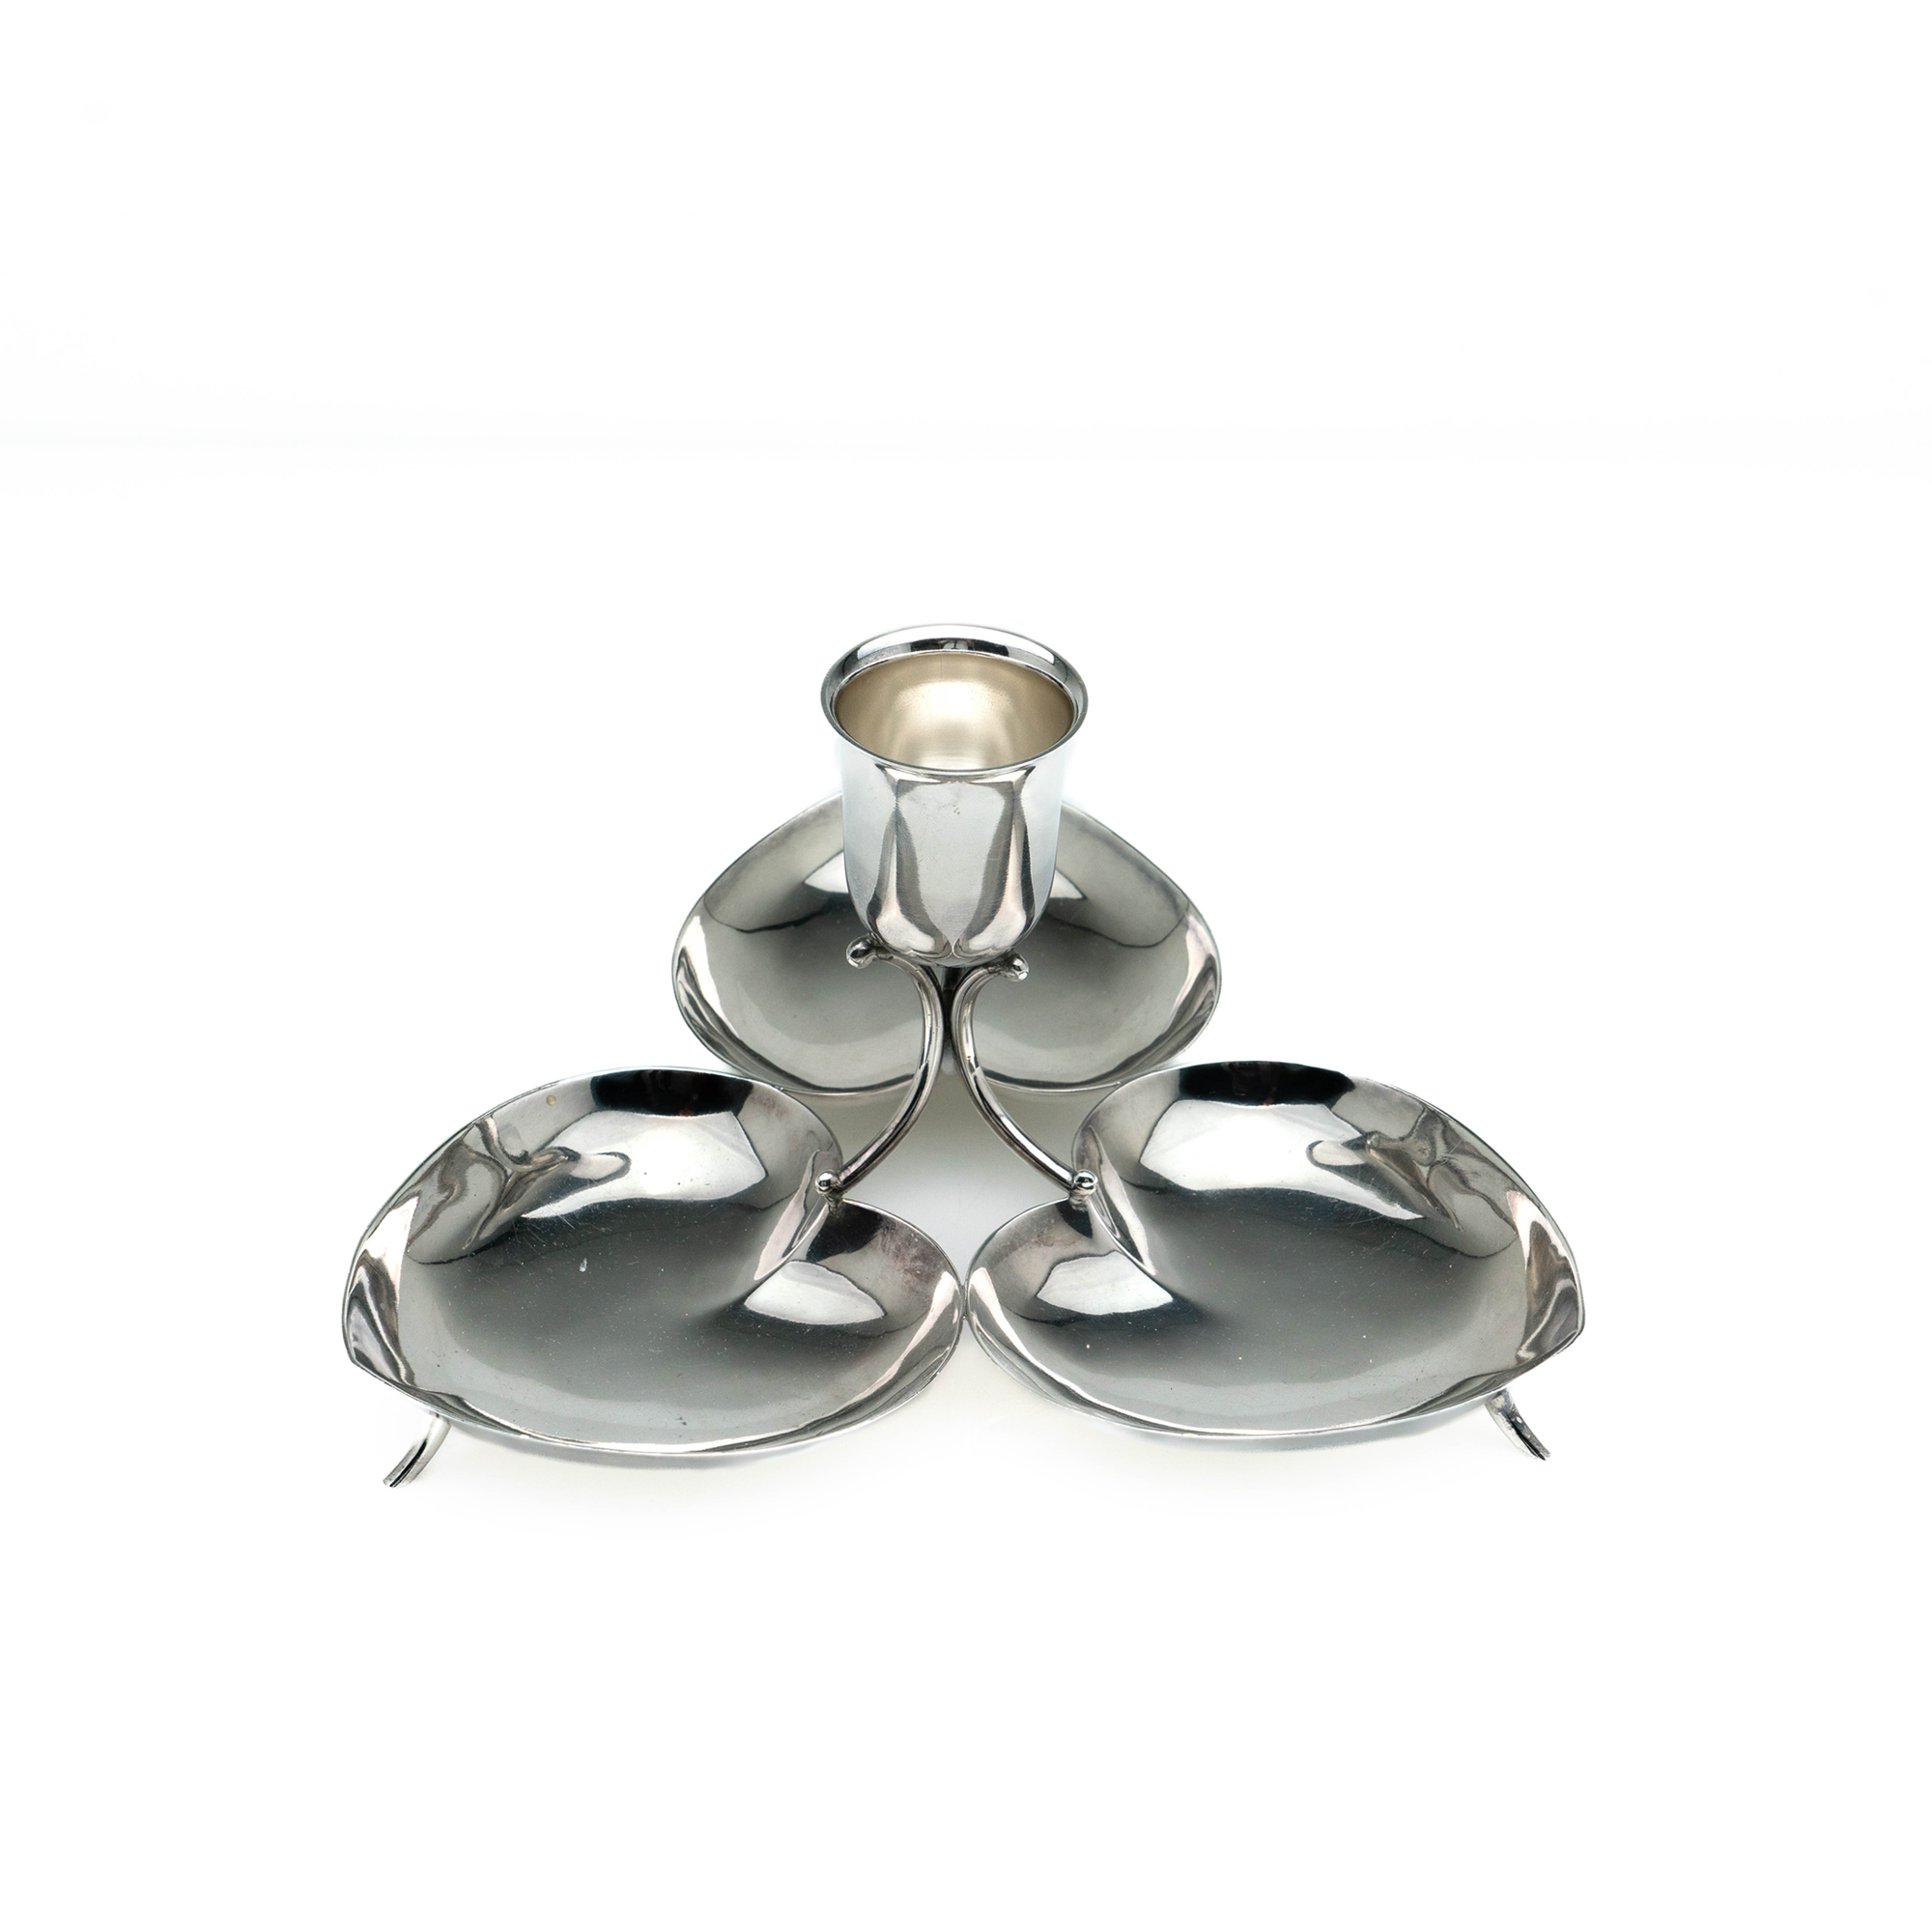 Christian Dior Catchall/Candle Holder